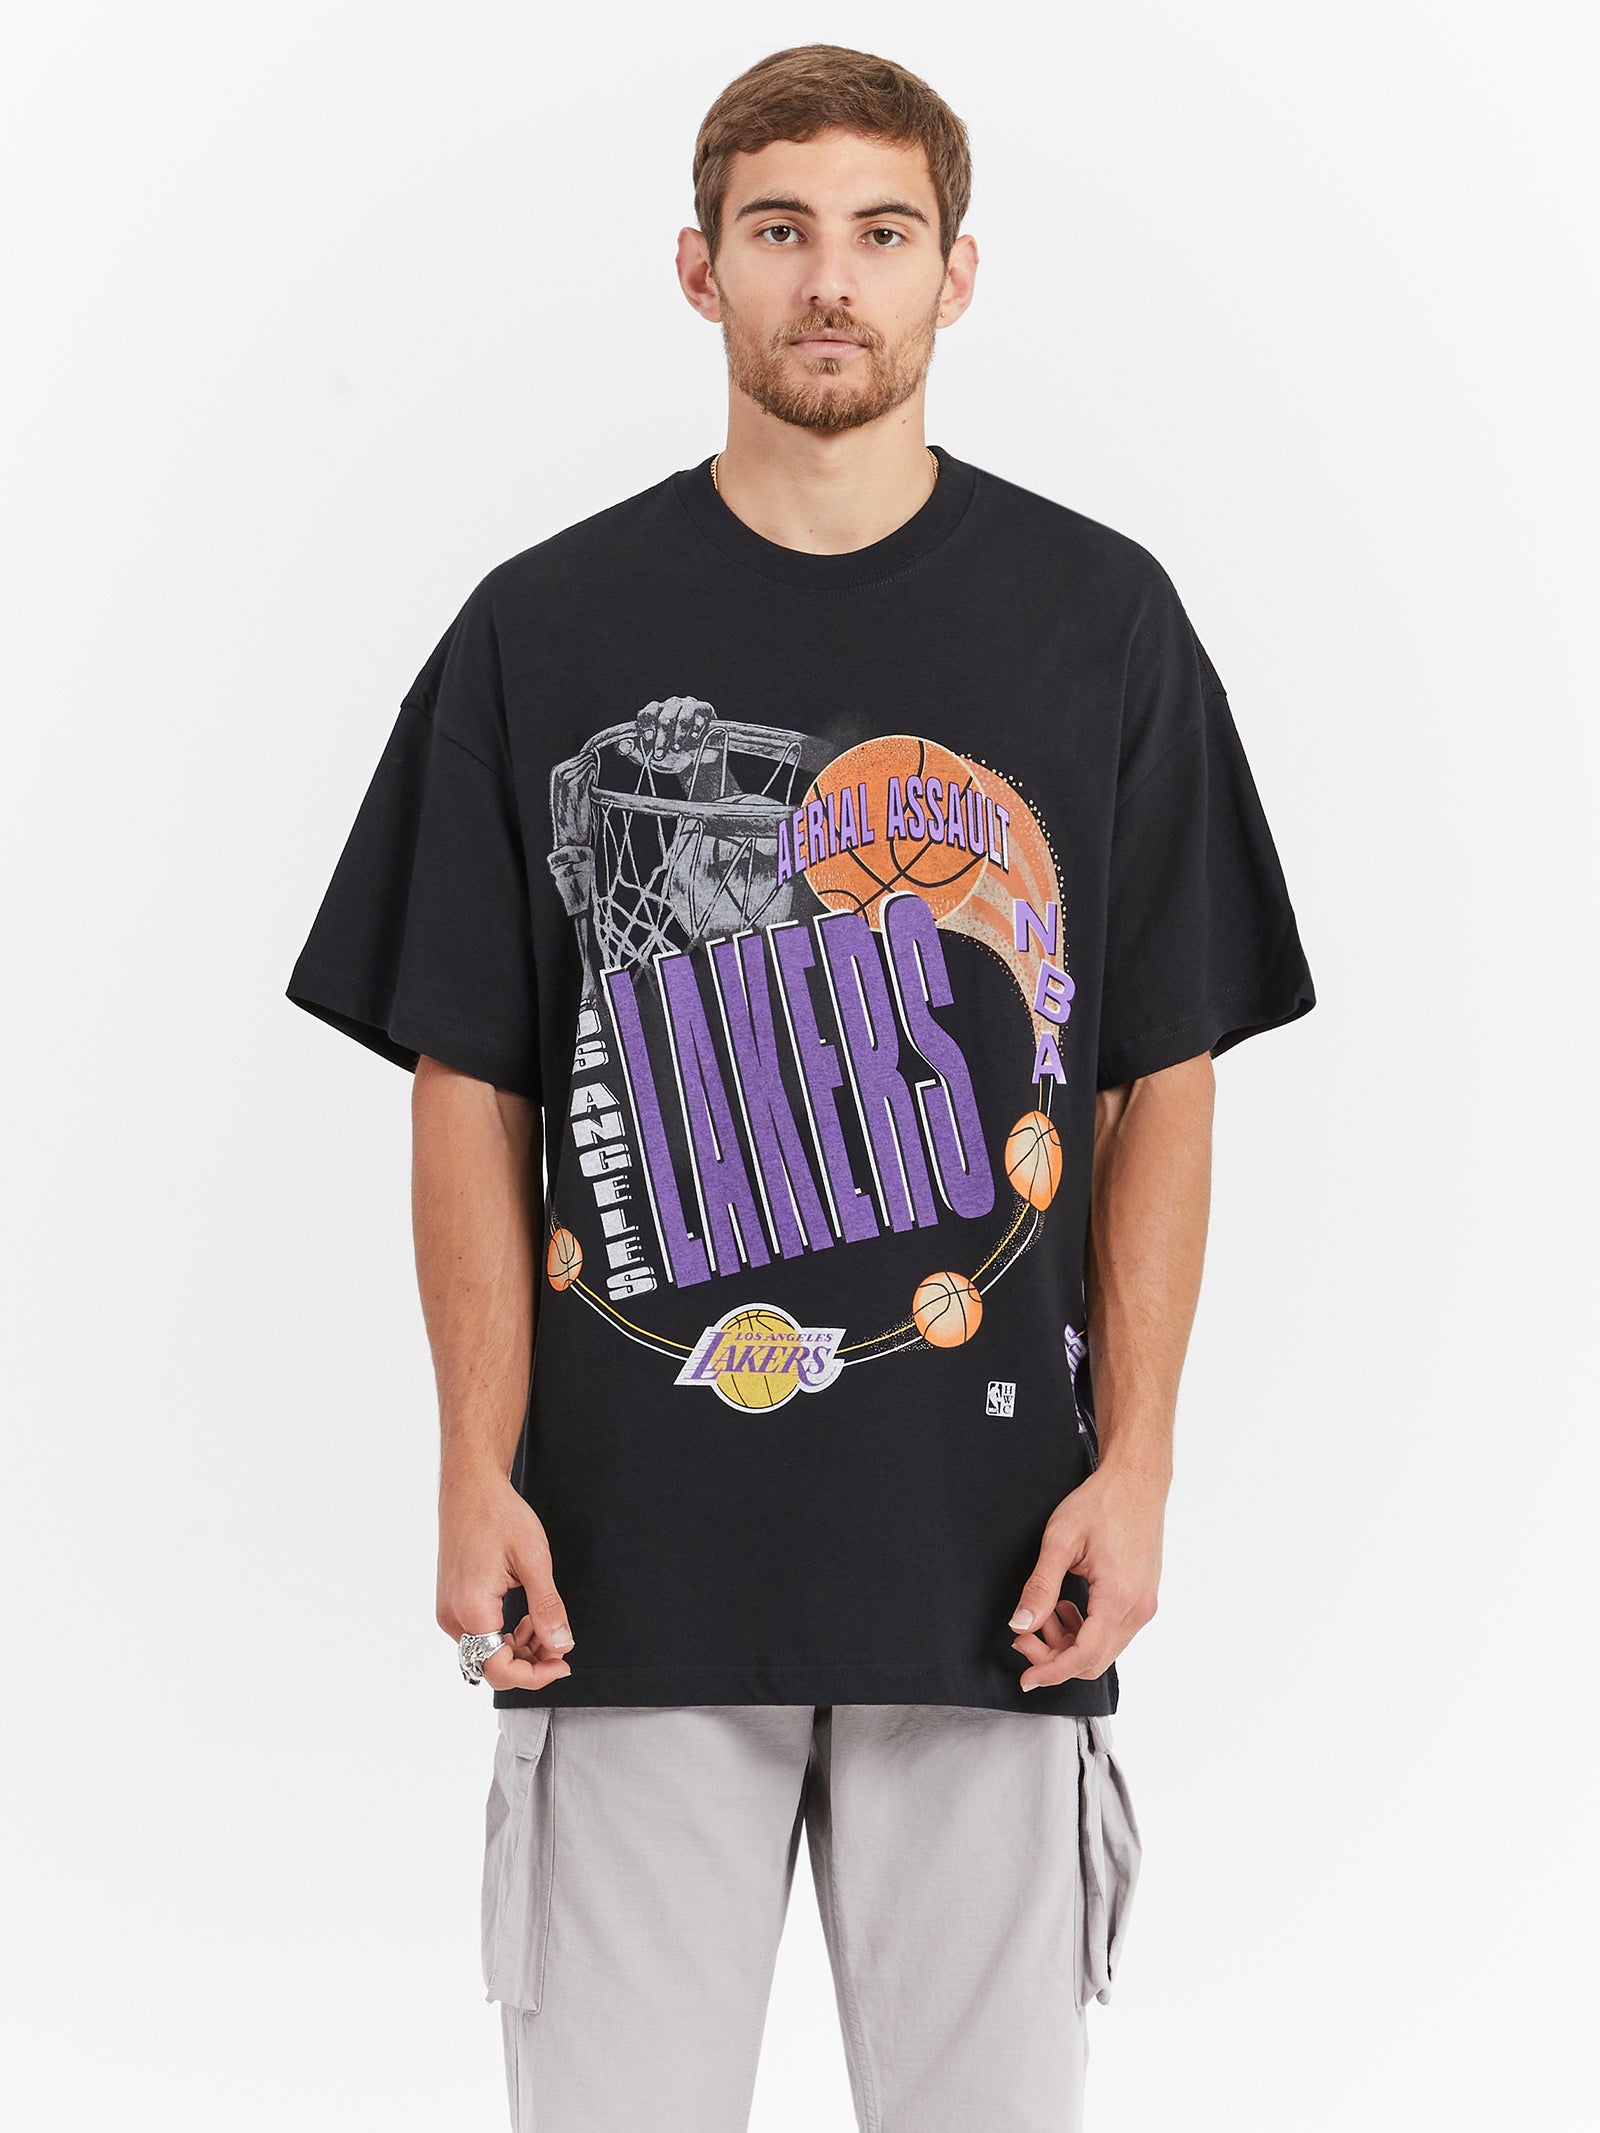 Los Angeles Lakers Aerial Assault T-Shirt in Faded Black - Glue Store